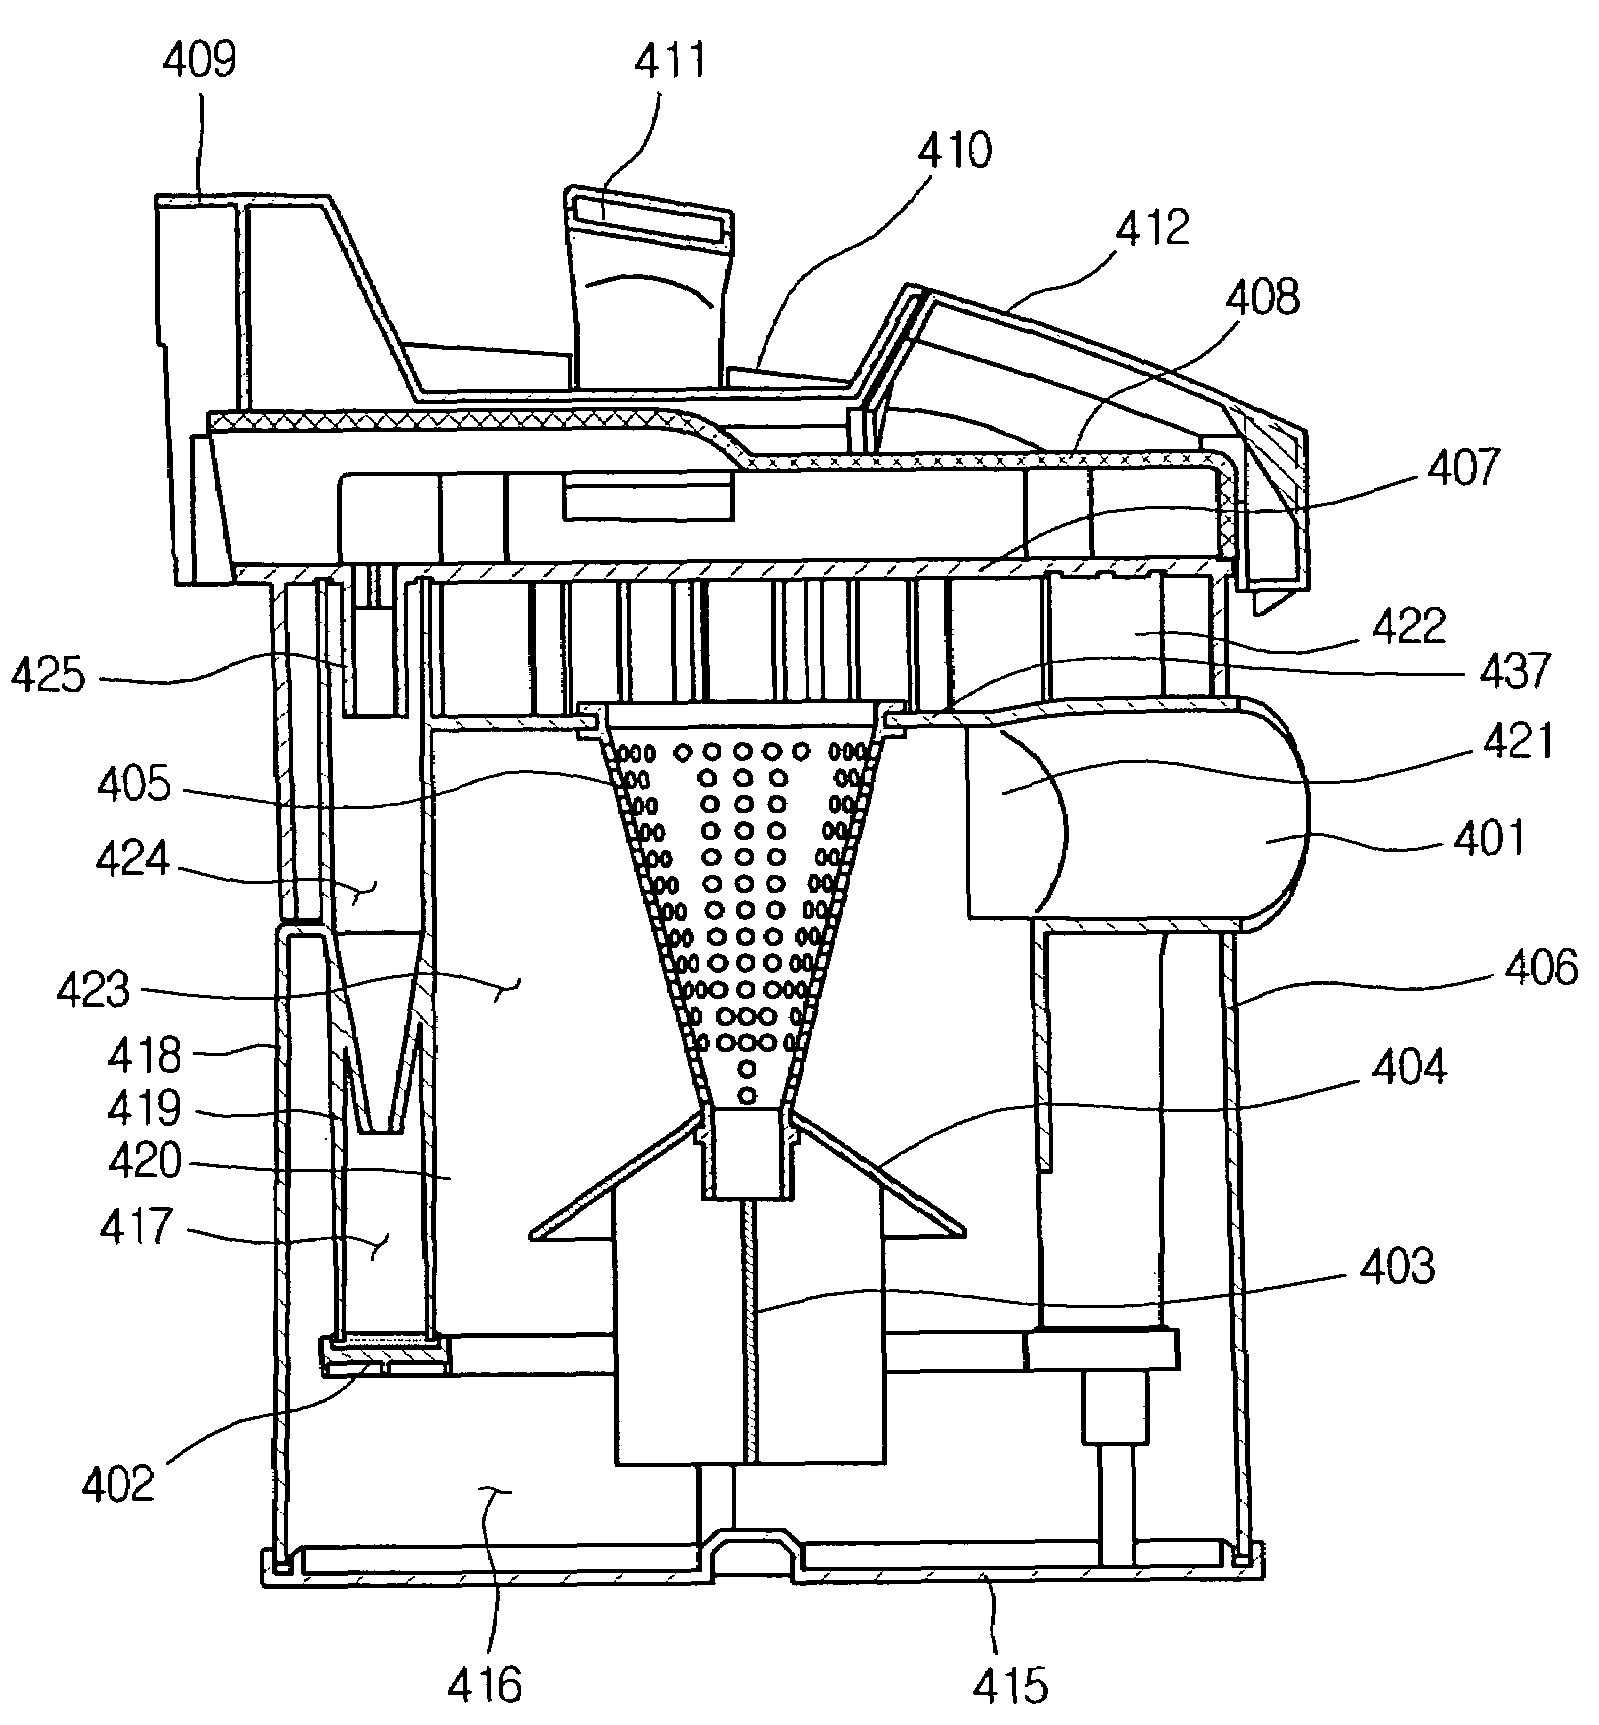 Dust collection unit and vacuum cleaner with the same